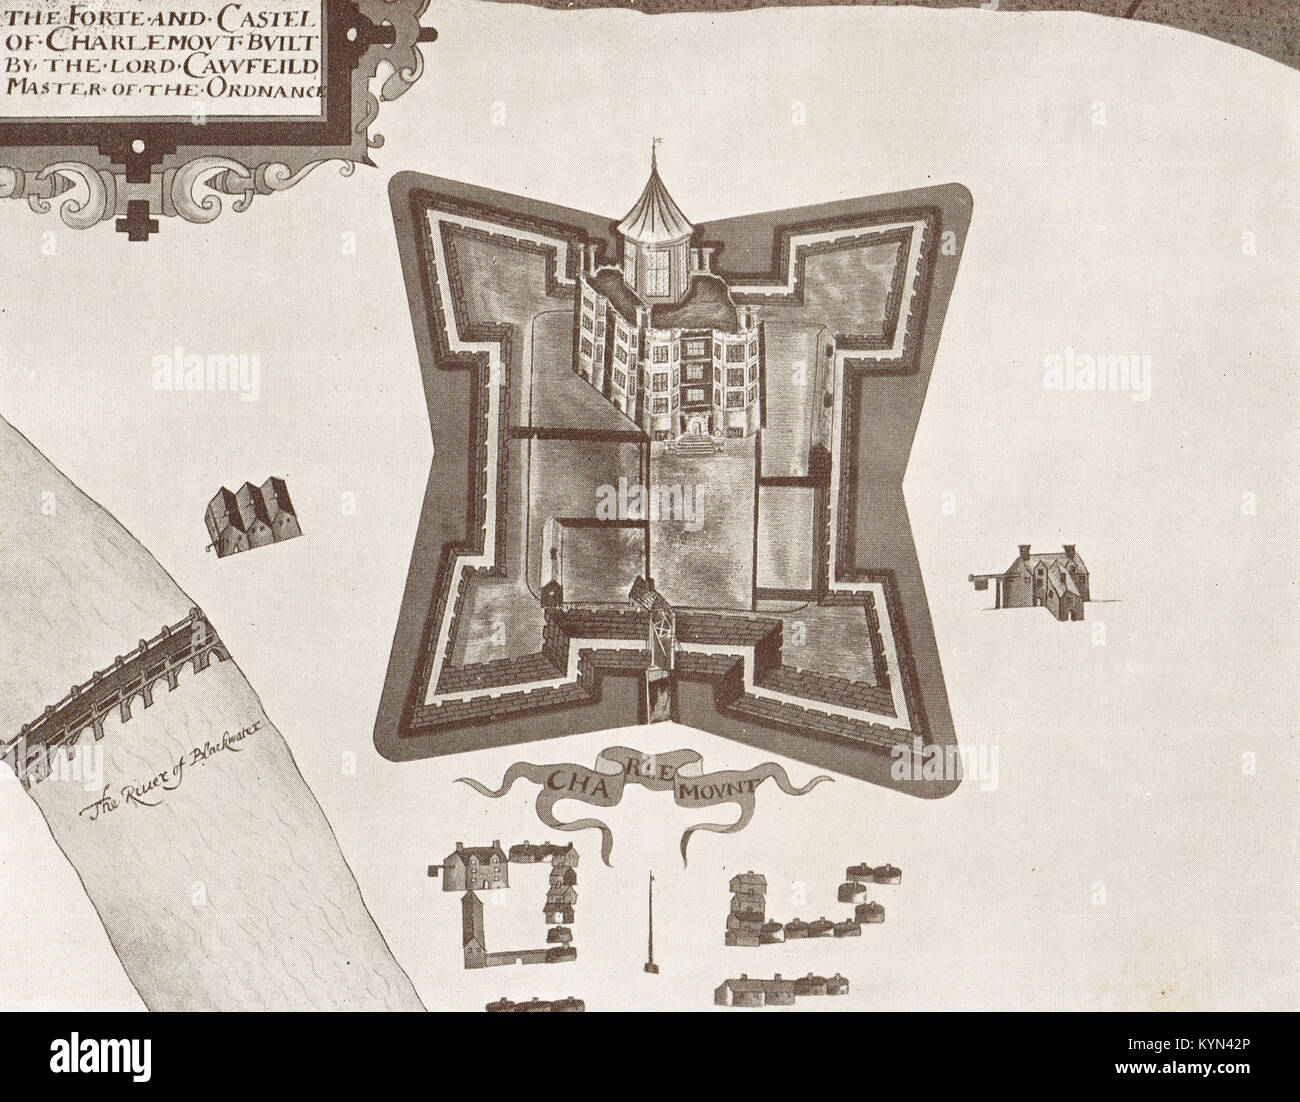 Plan of the Fortress of Charlemont Stock Photo